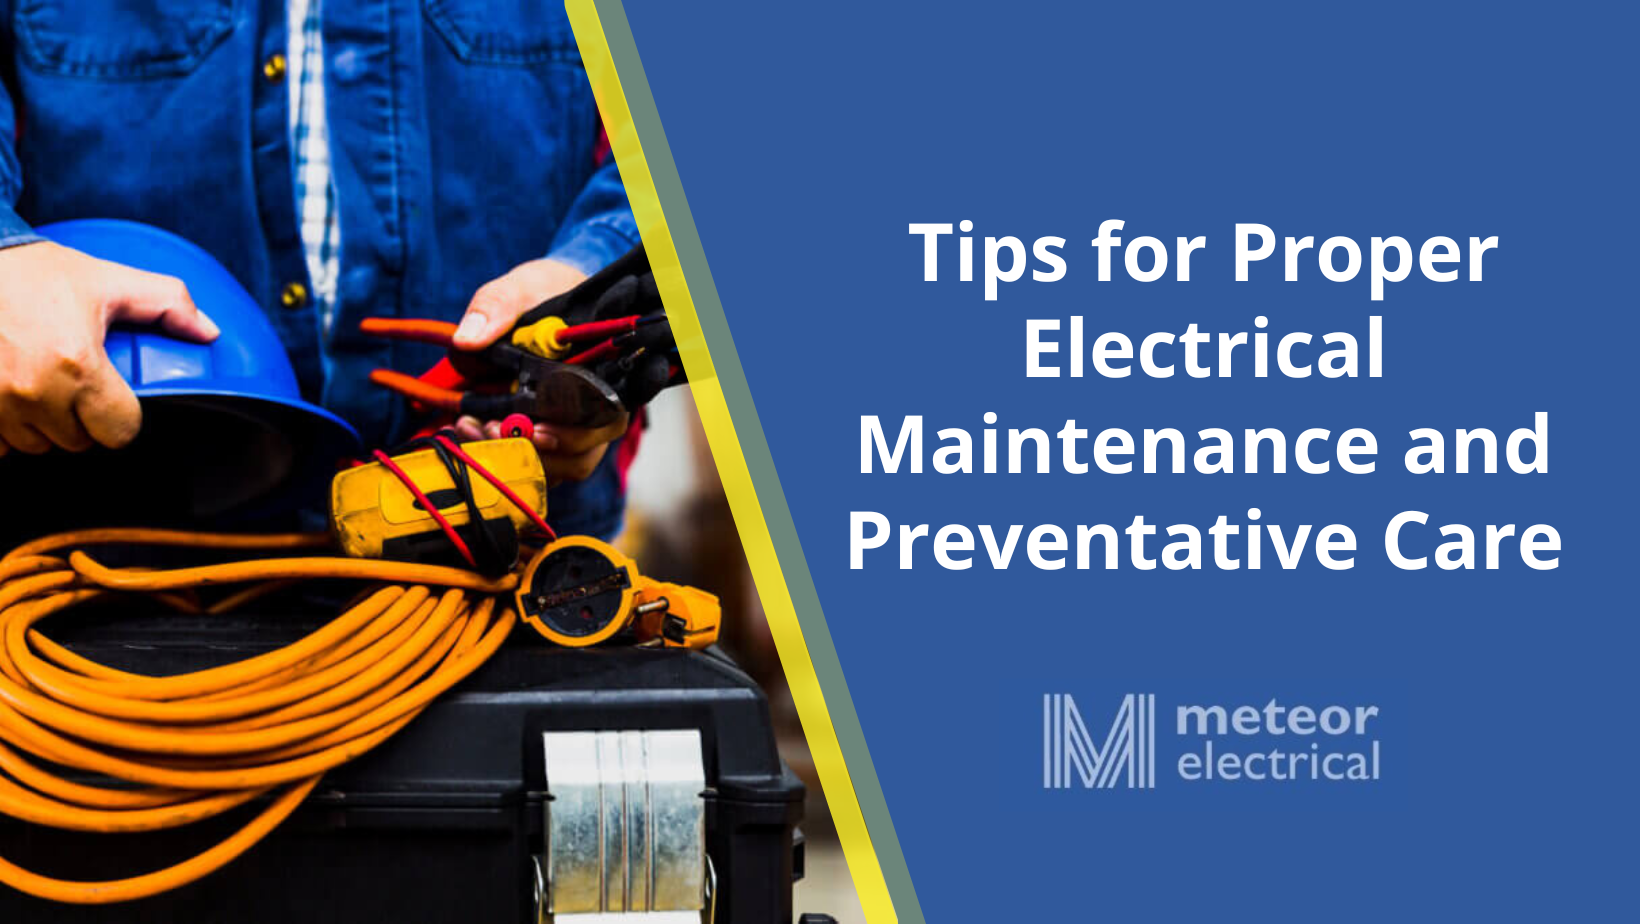 Tips for Proper Electrical Maintenance and Preventative Care